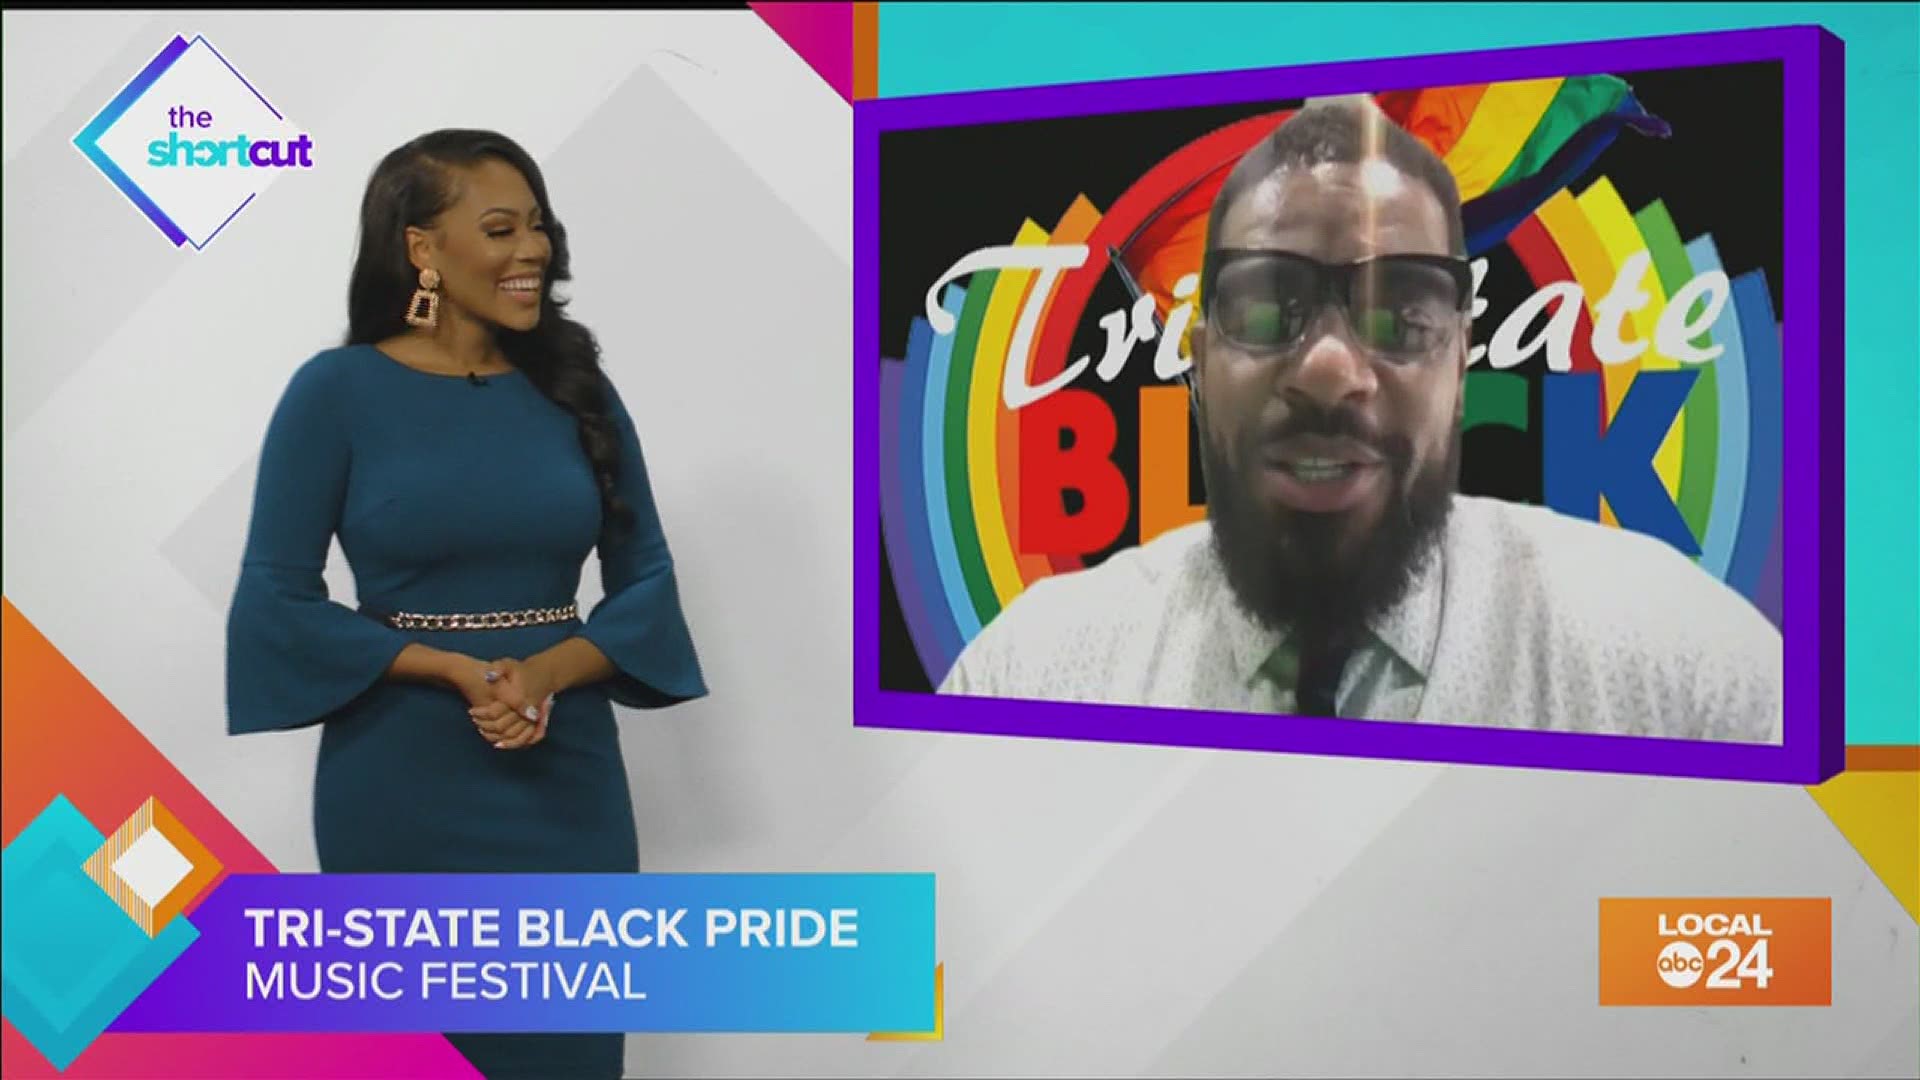 Become a part of history today by joining Sydney Neely and Dr. Davin C. Clemons for a sneak peak of the 1st annual Tri-State Black Pride music fest in Memphis!